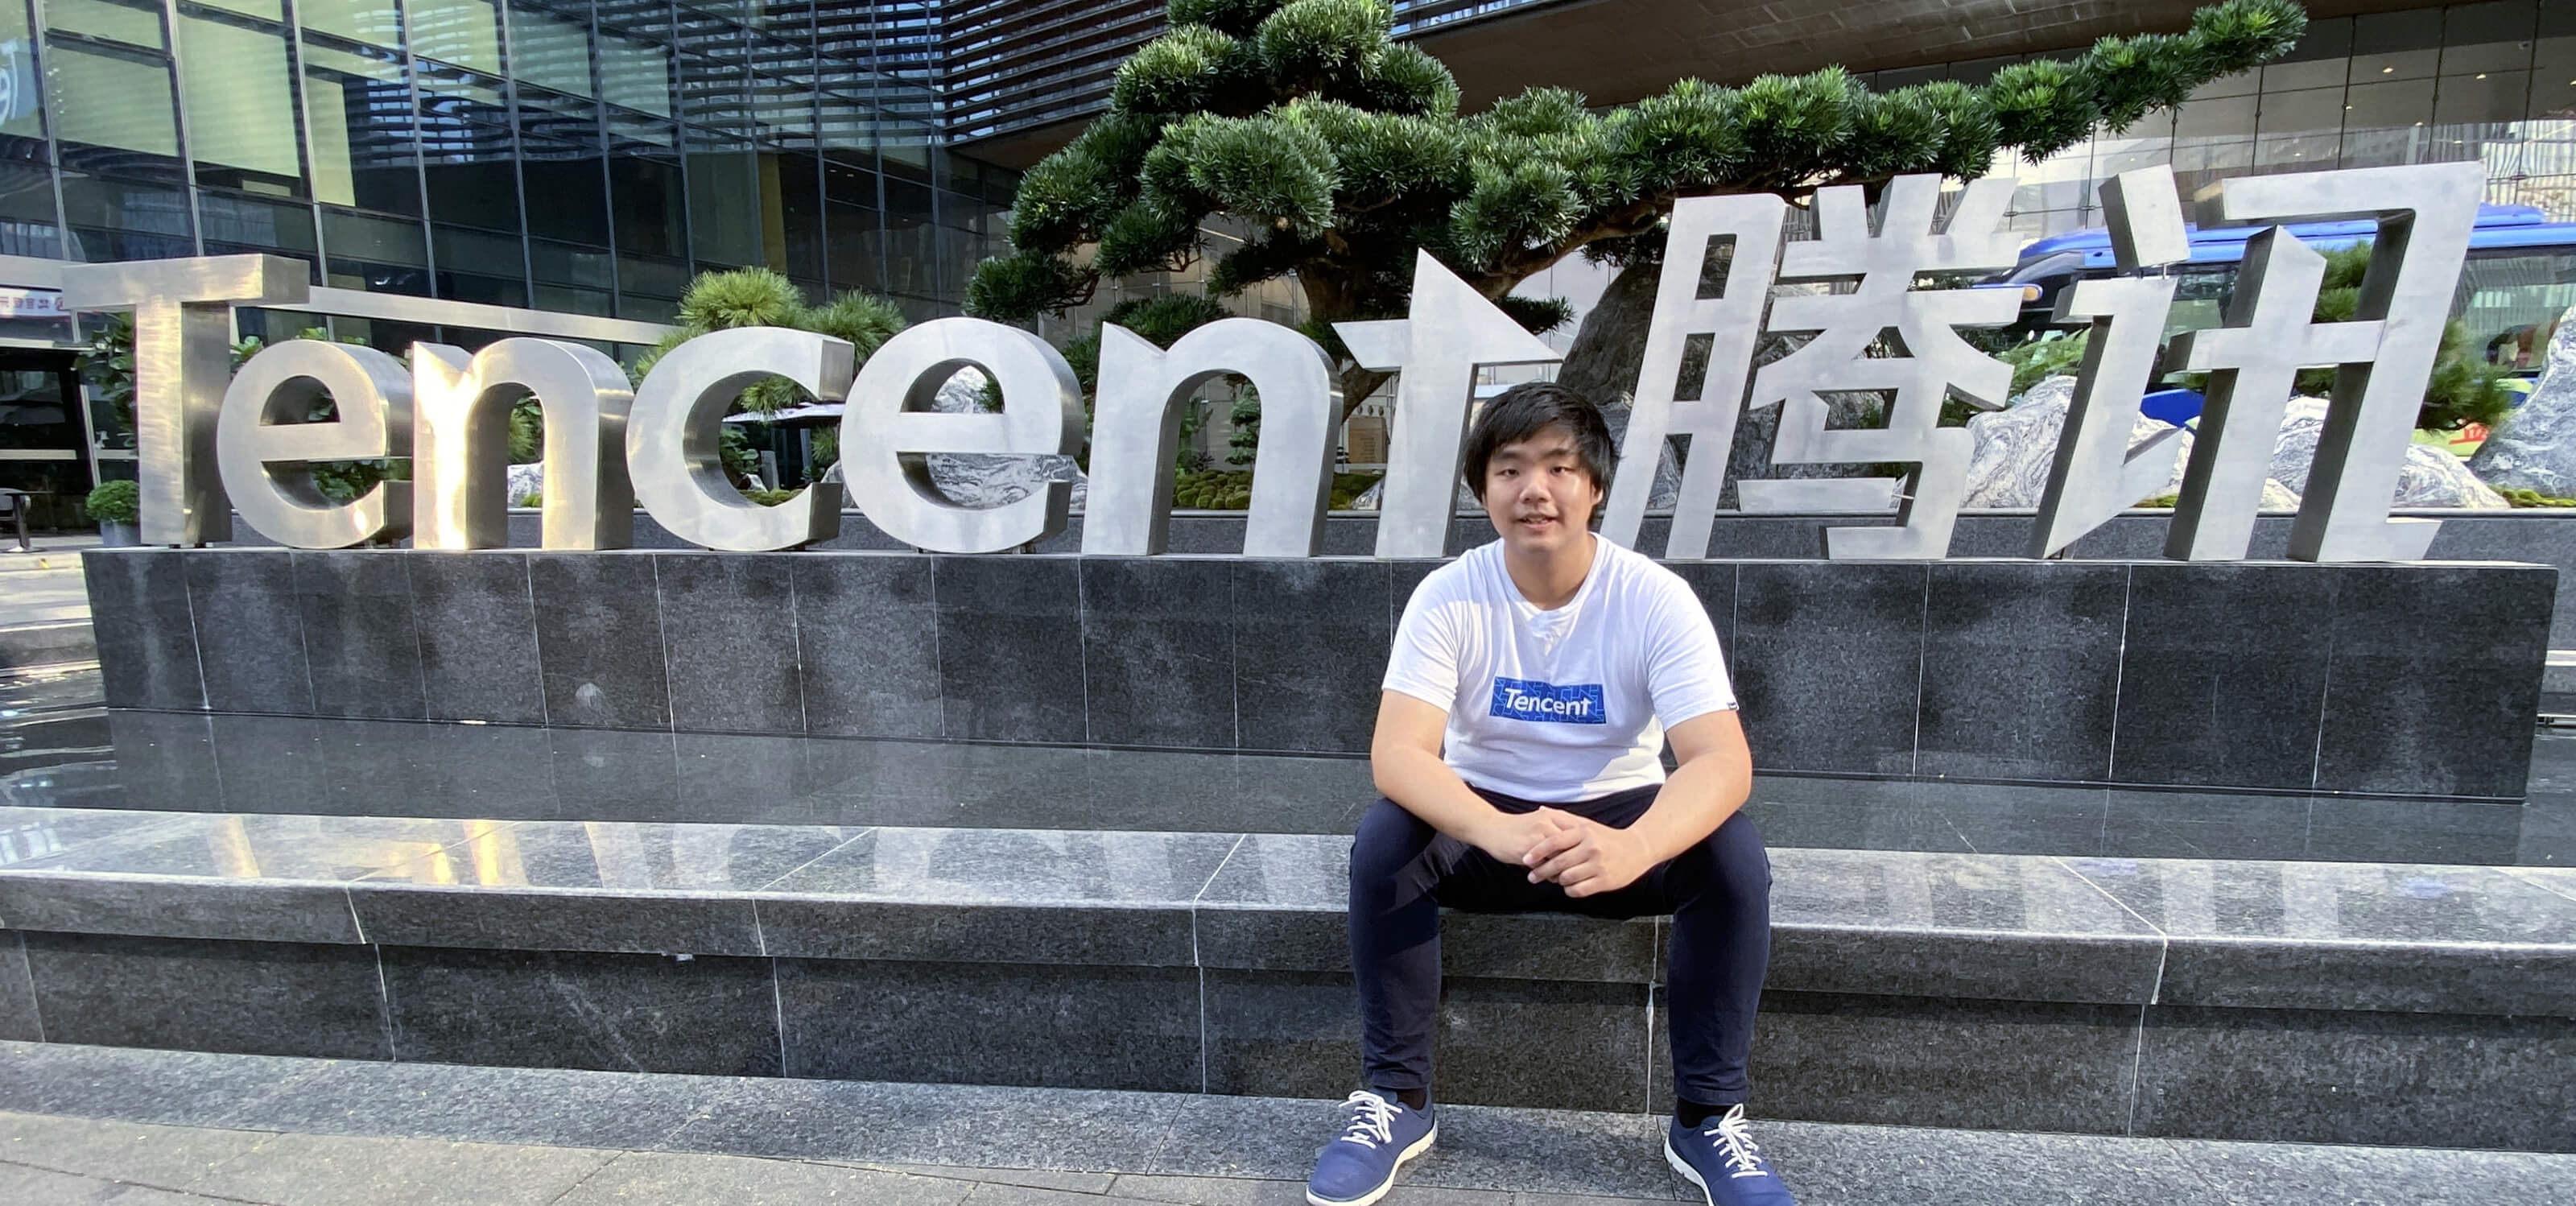 Sim Yi Cong sits by a pool in front of a large Tencent logo sign outside the Tencent headquarters building.